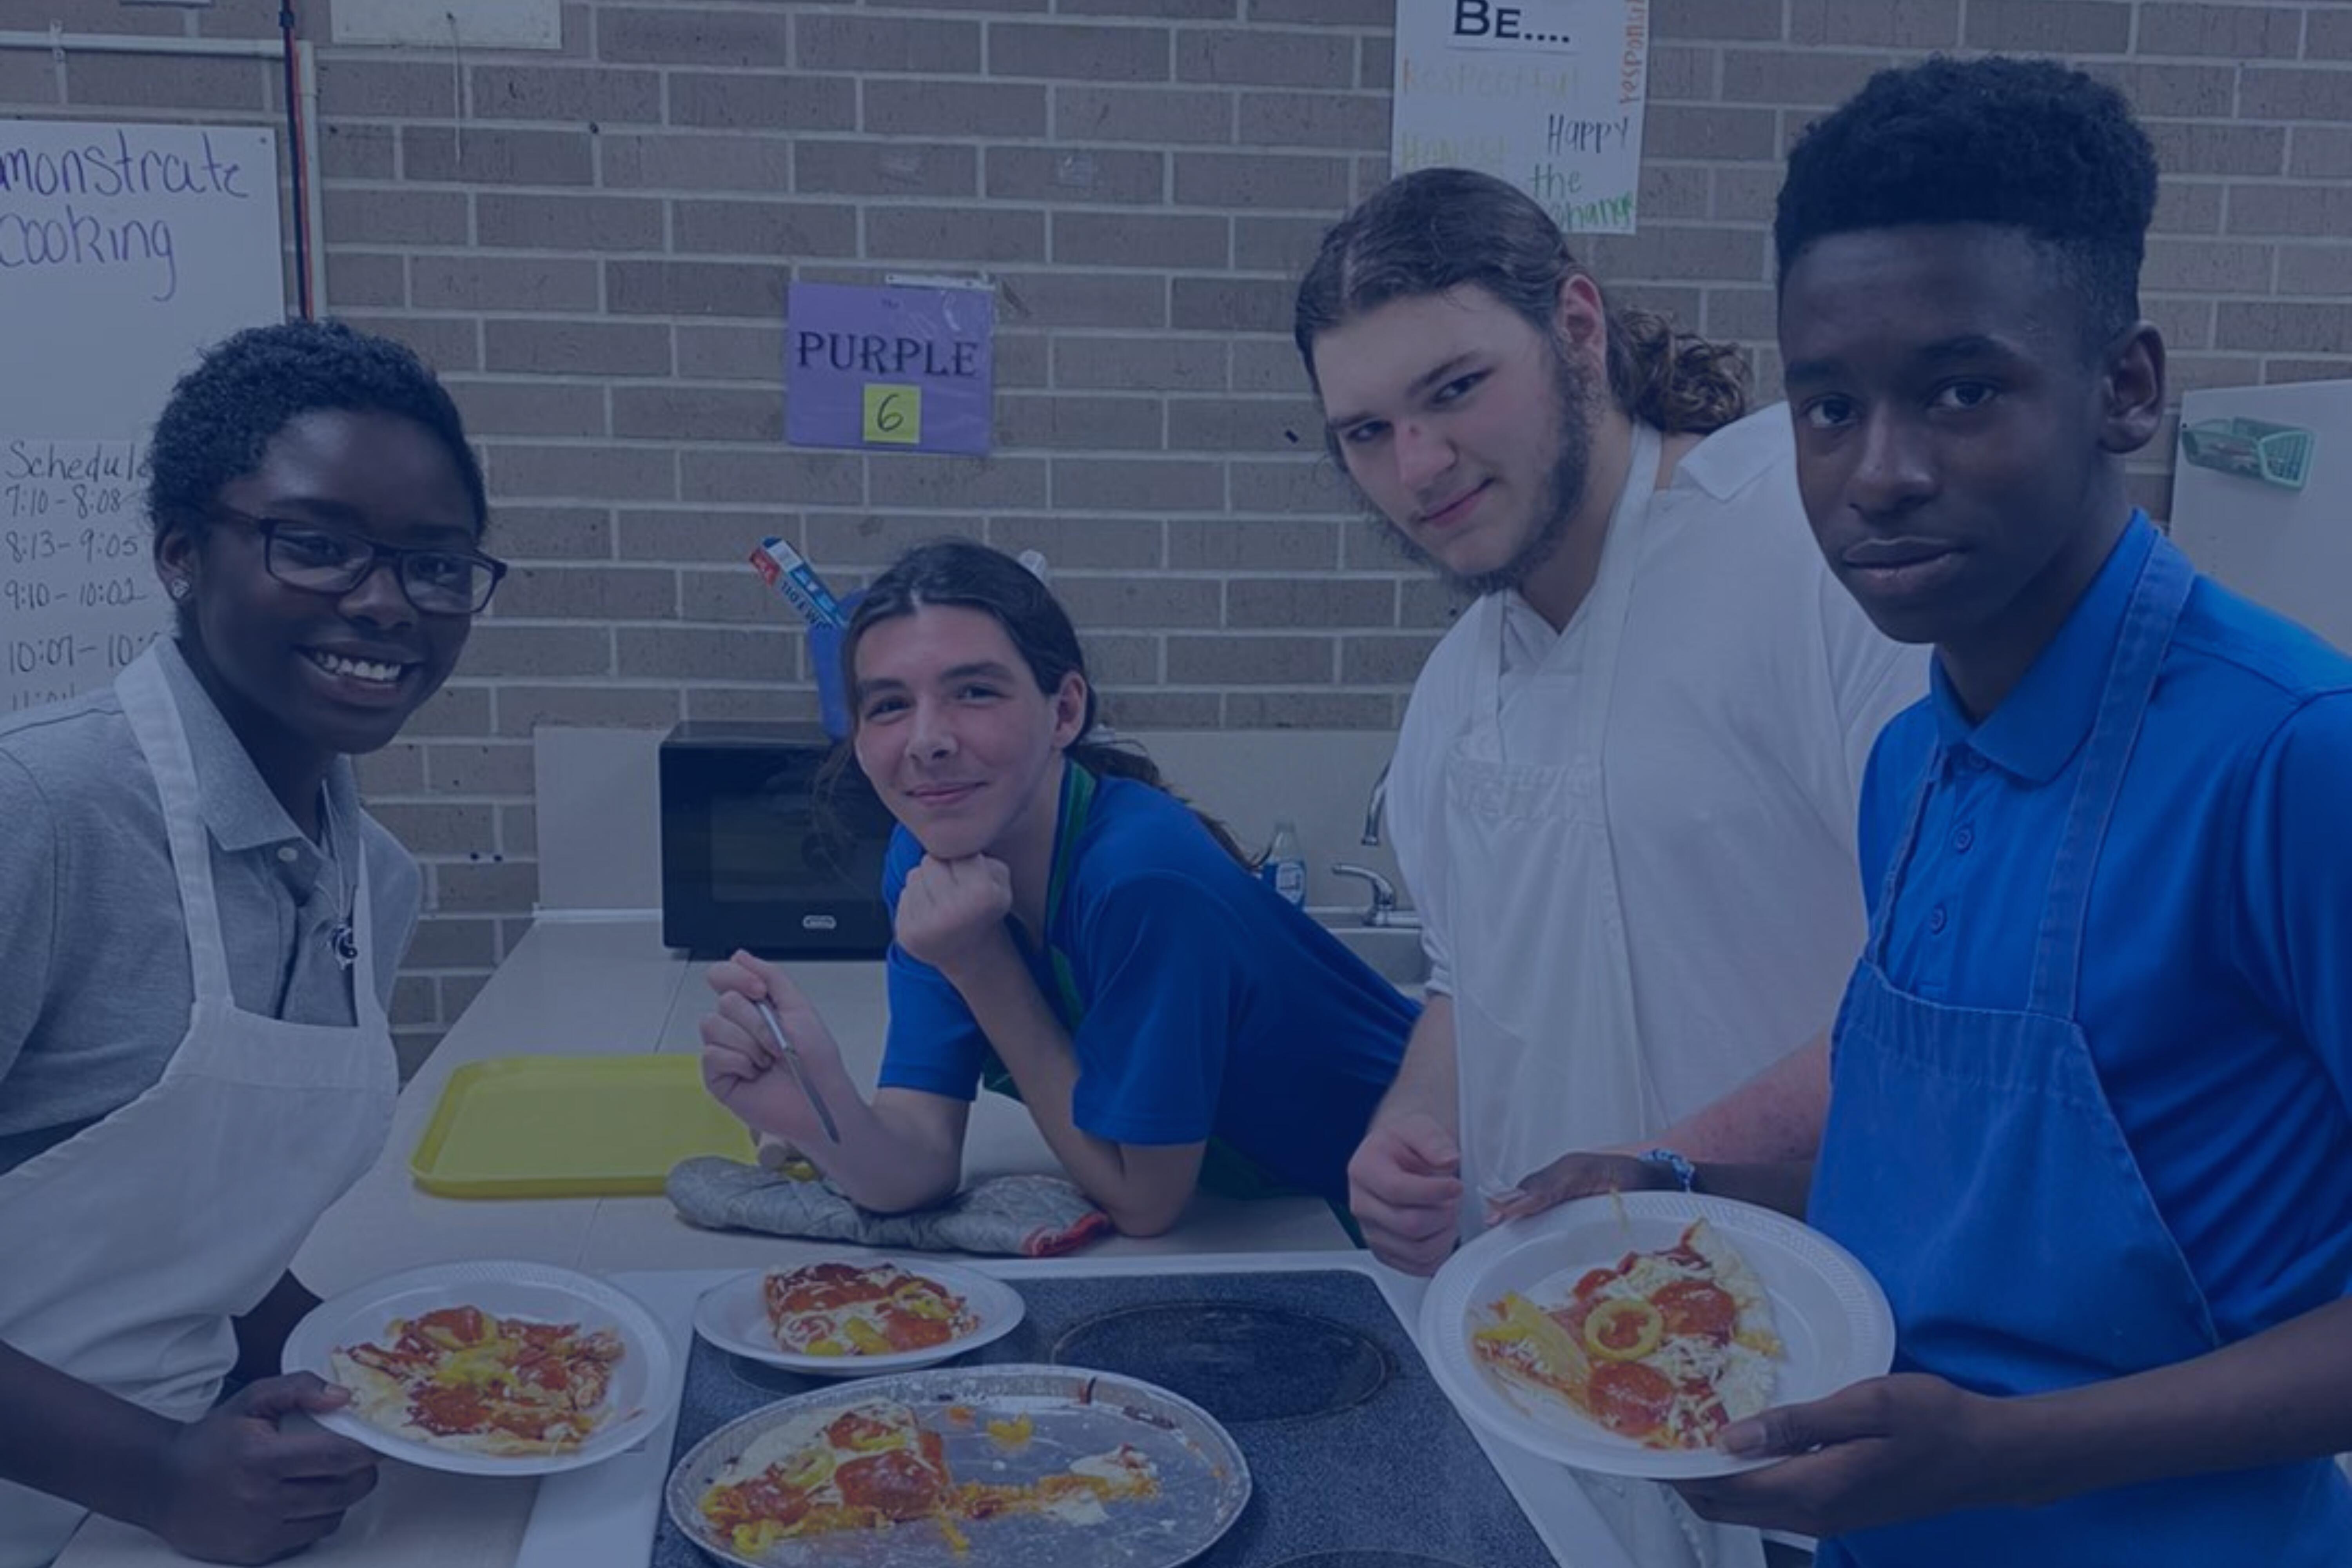 Students cooking pizza